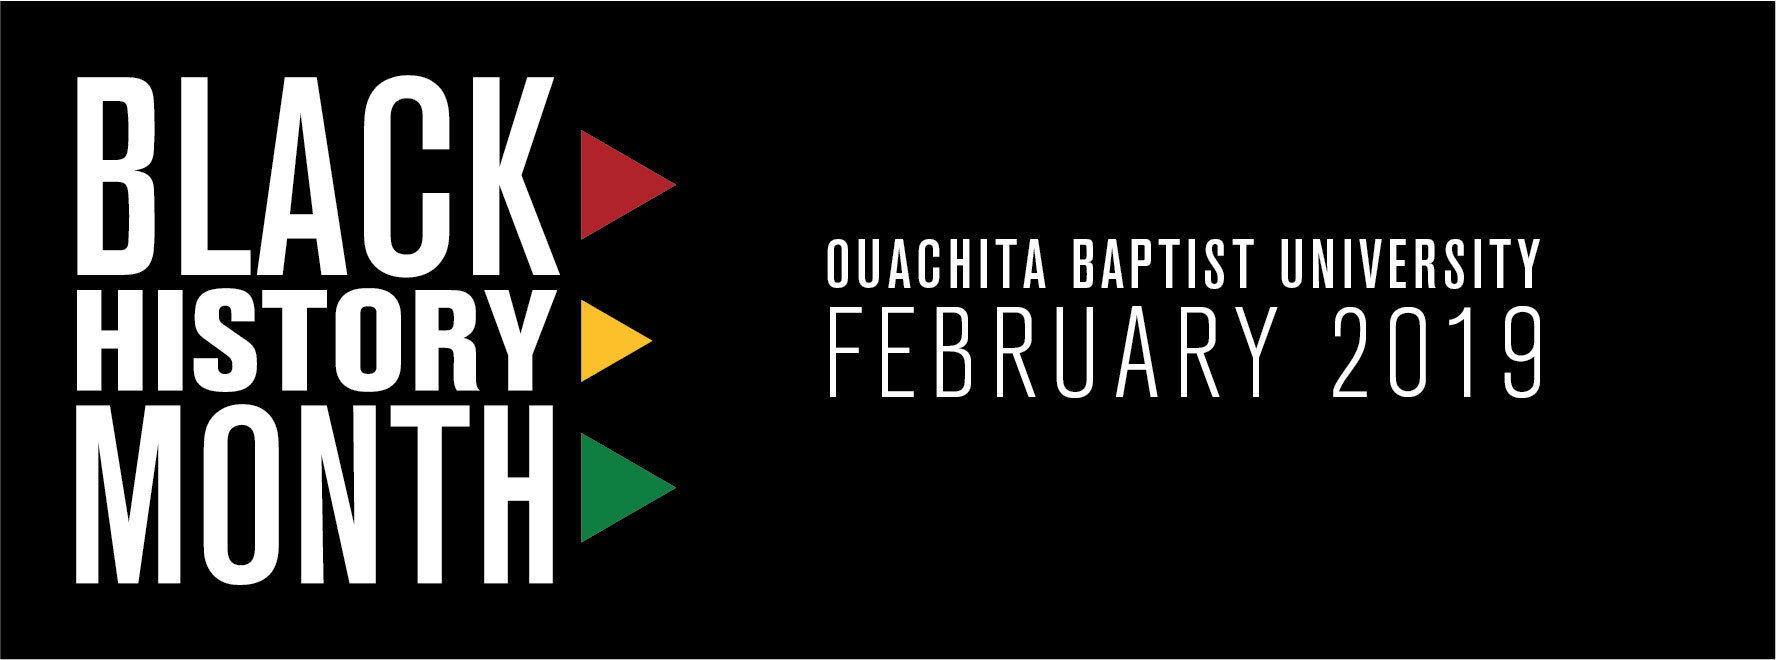  Ouachita hosts speaker Trillia Newbell and other February campus events to observe Black History Month.